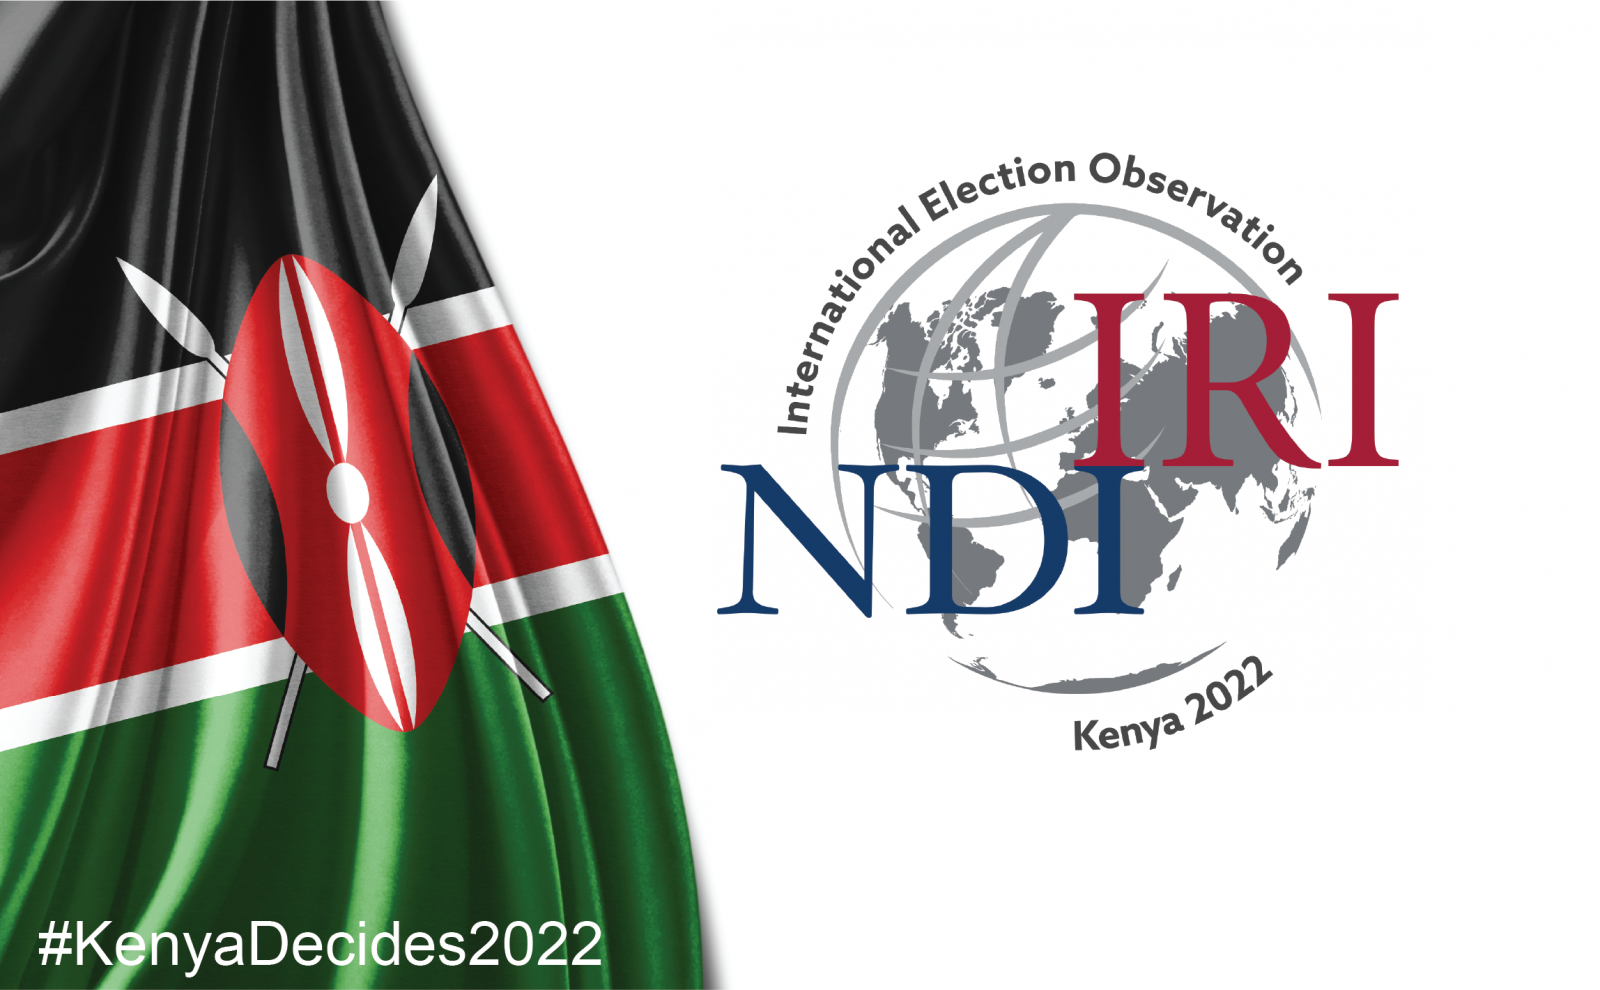 NDI/IRI IEOM URGENTLY CALLS FOR CALM FOLLOWING ANNOUNCEMENT OF PRESIDENTIAL RESULTS IN KENYA